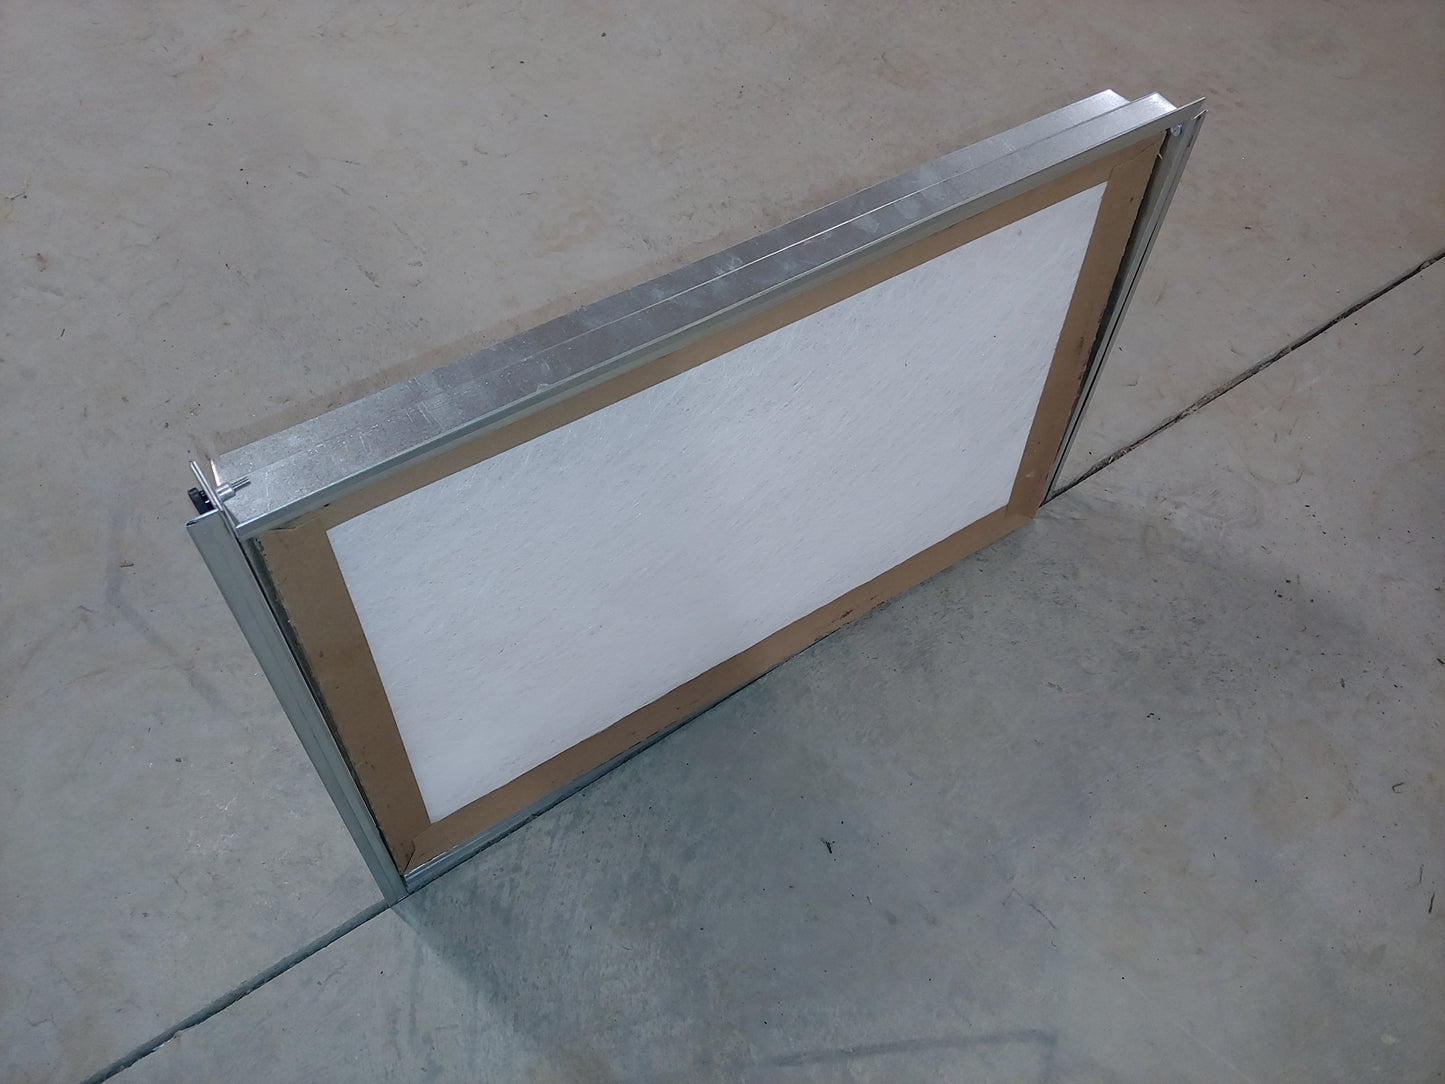 1" Universal Filter Rack Available In-16"X25"X1"/ -16"X24"X1" / -16"X20"X1" -14"X25"X1" / -14"X24"X1" / -14"X20"X1"/ -12"X24"X1" / -12"X20"X1"